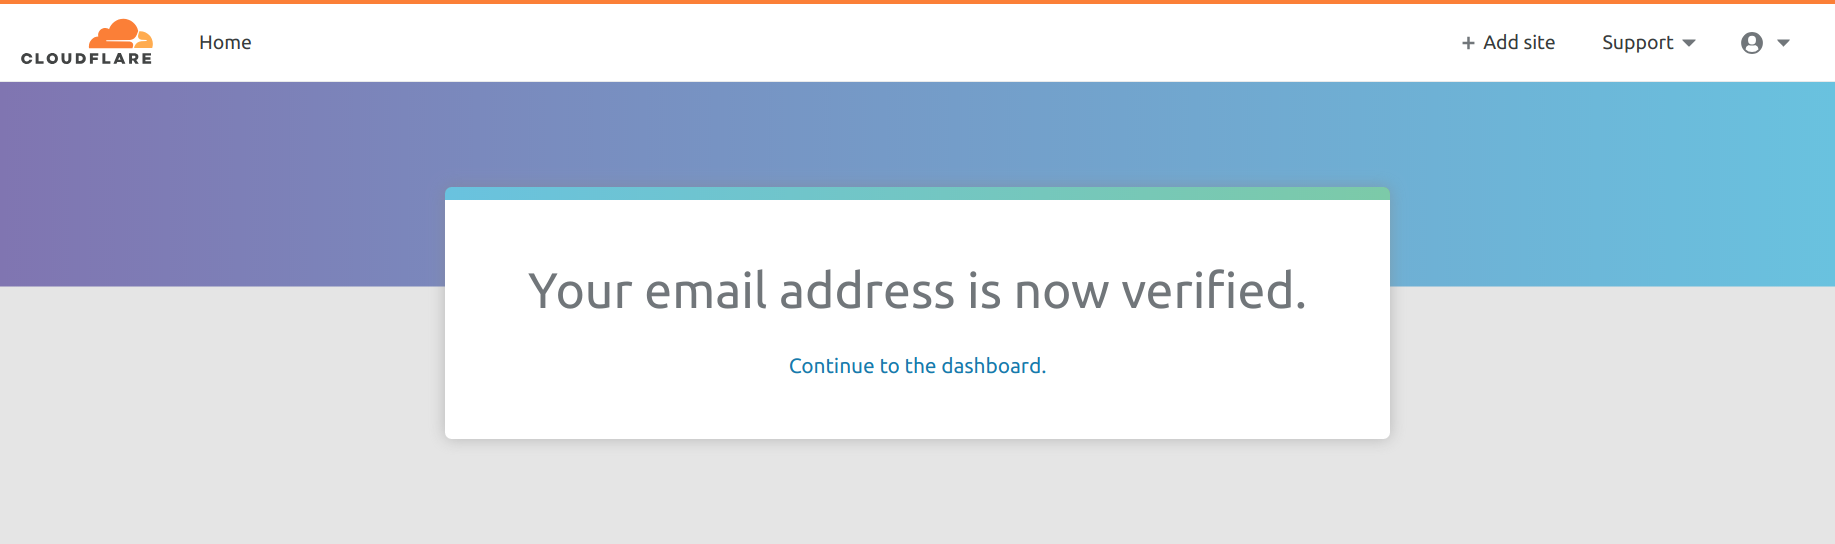 A screenshot of Cloudflare indicating that my email address is now verified.